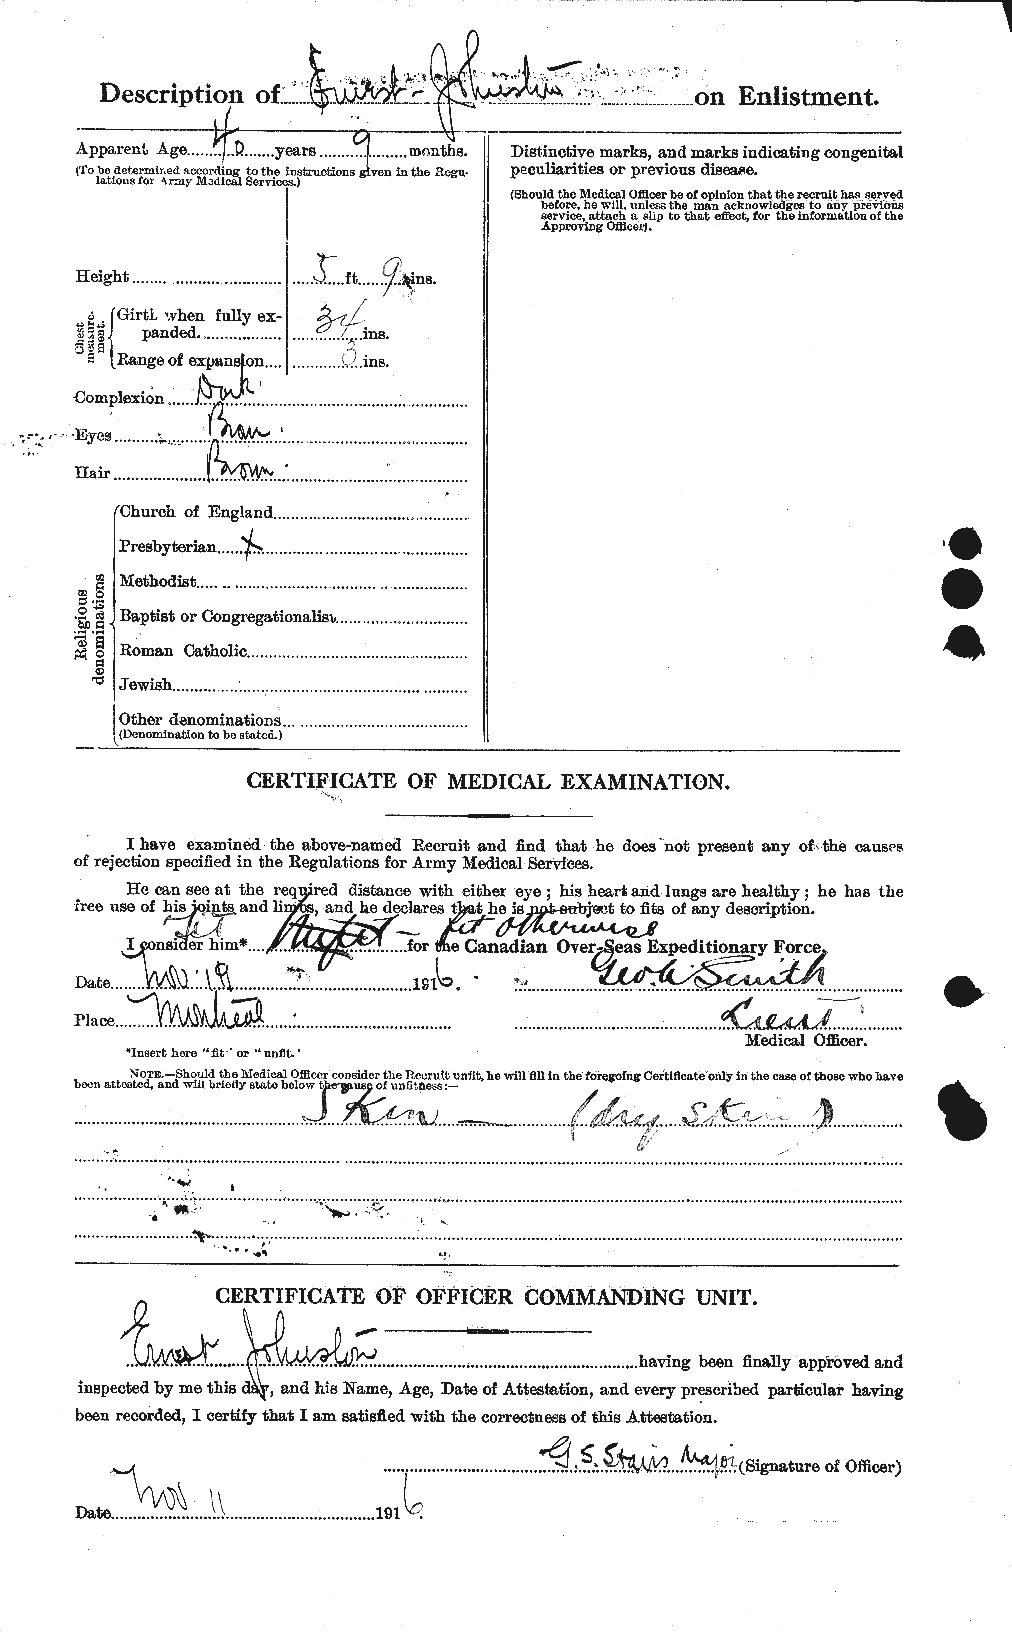 Personnel Records of the First World War - CEF 423242b